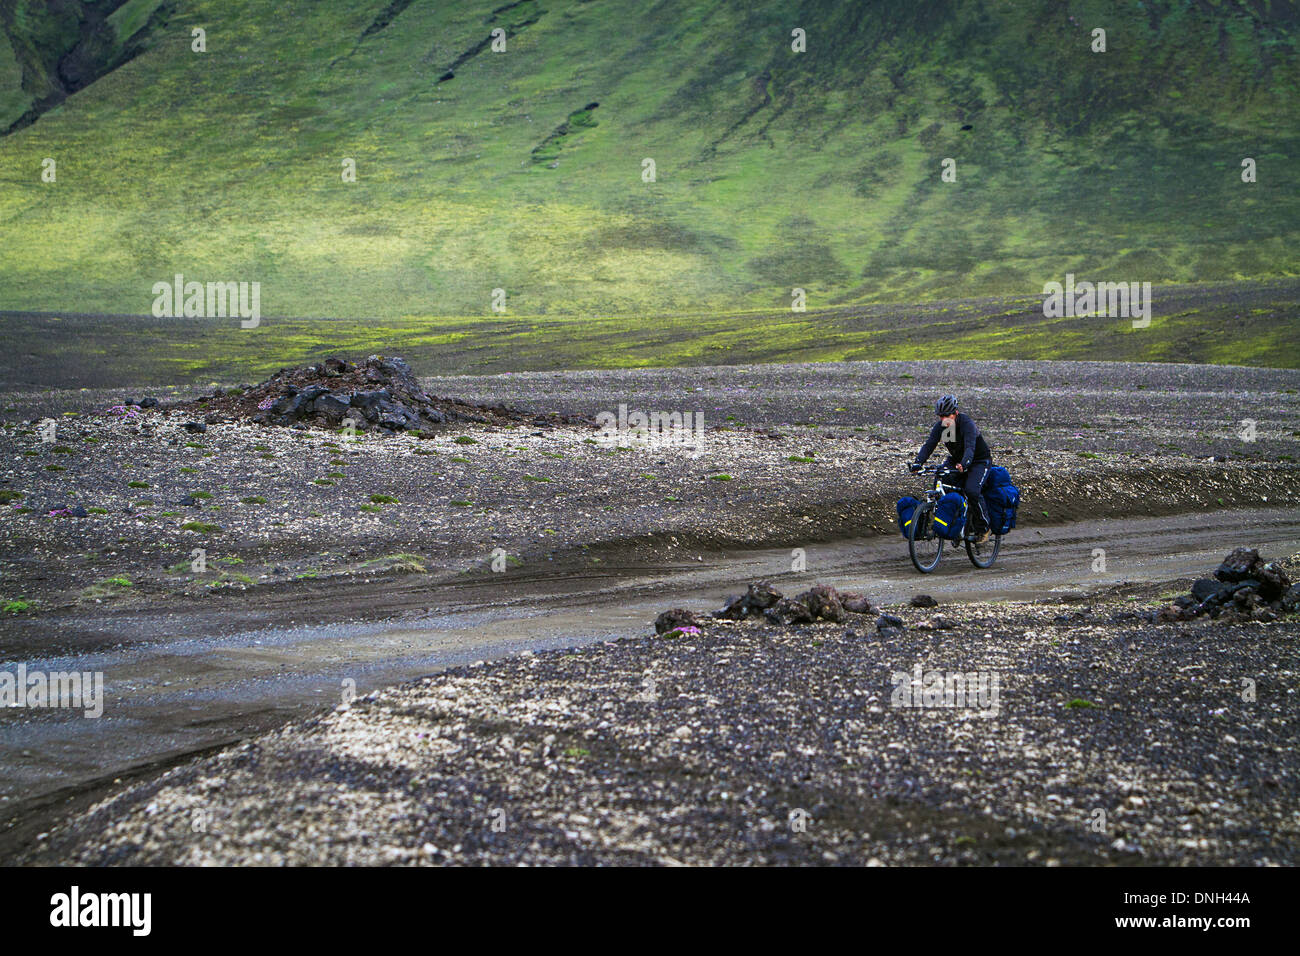 CYCLING ON THE TRAILS IN LANDMANNALAUGAR, VOLCANIC AND GEOTHERMAL ZONE OF WHICH THE NAME LITERALLY MEANS 'HOT BATHS OF THE PEOPLE OF THE LAND', REGION OF THE HIGH PLATEAUS, SOUTHERN ICELAND, EUROPE Stock Photo